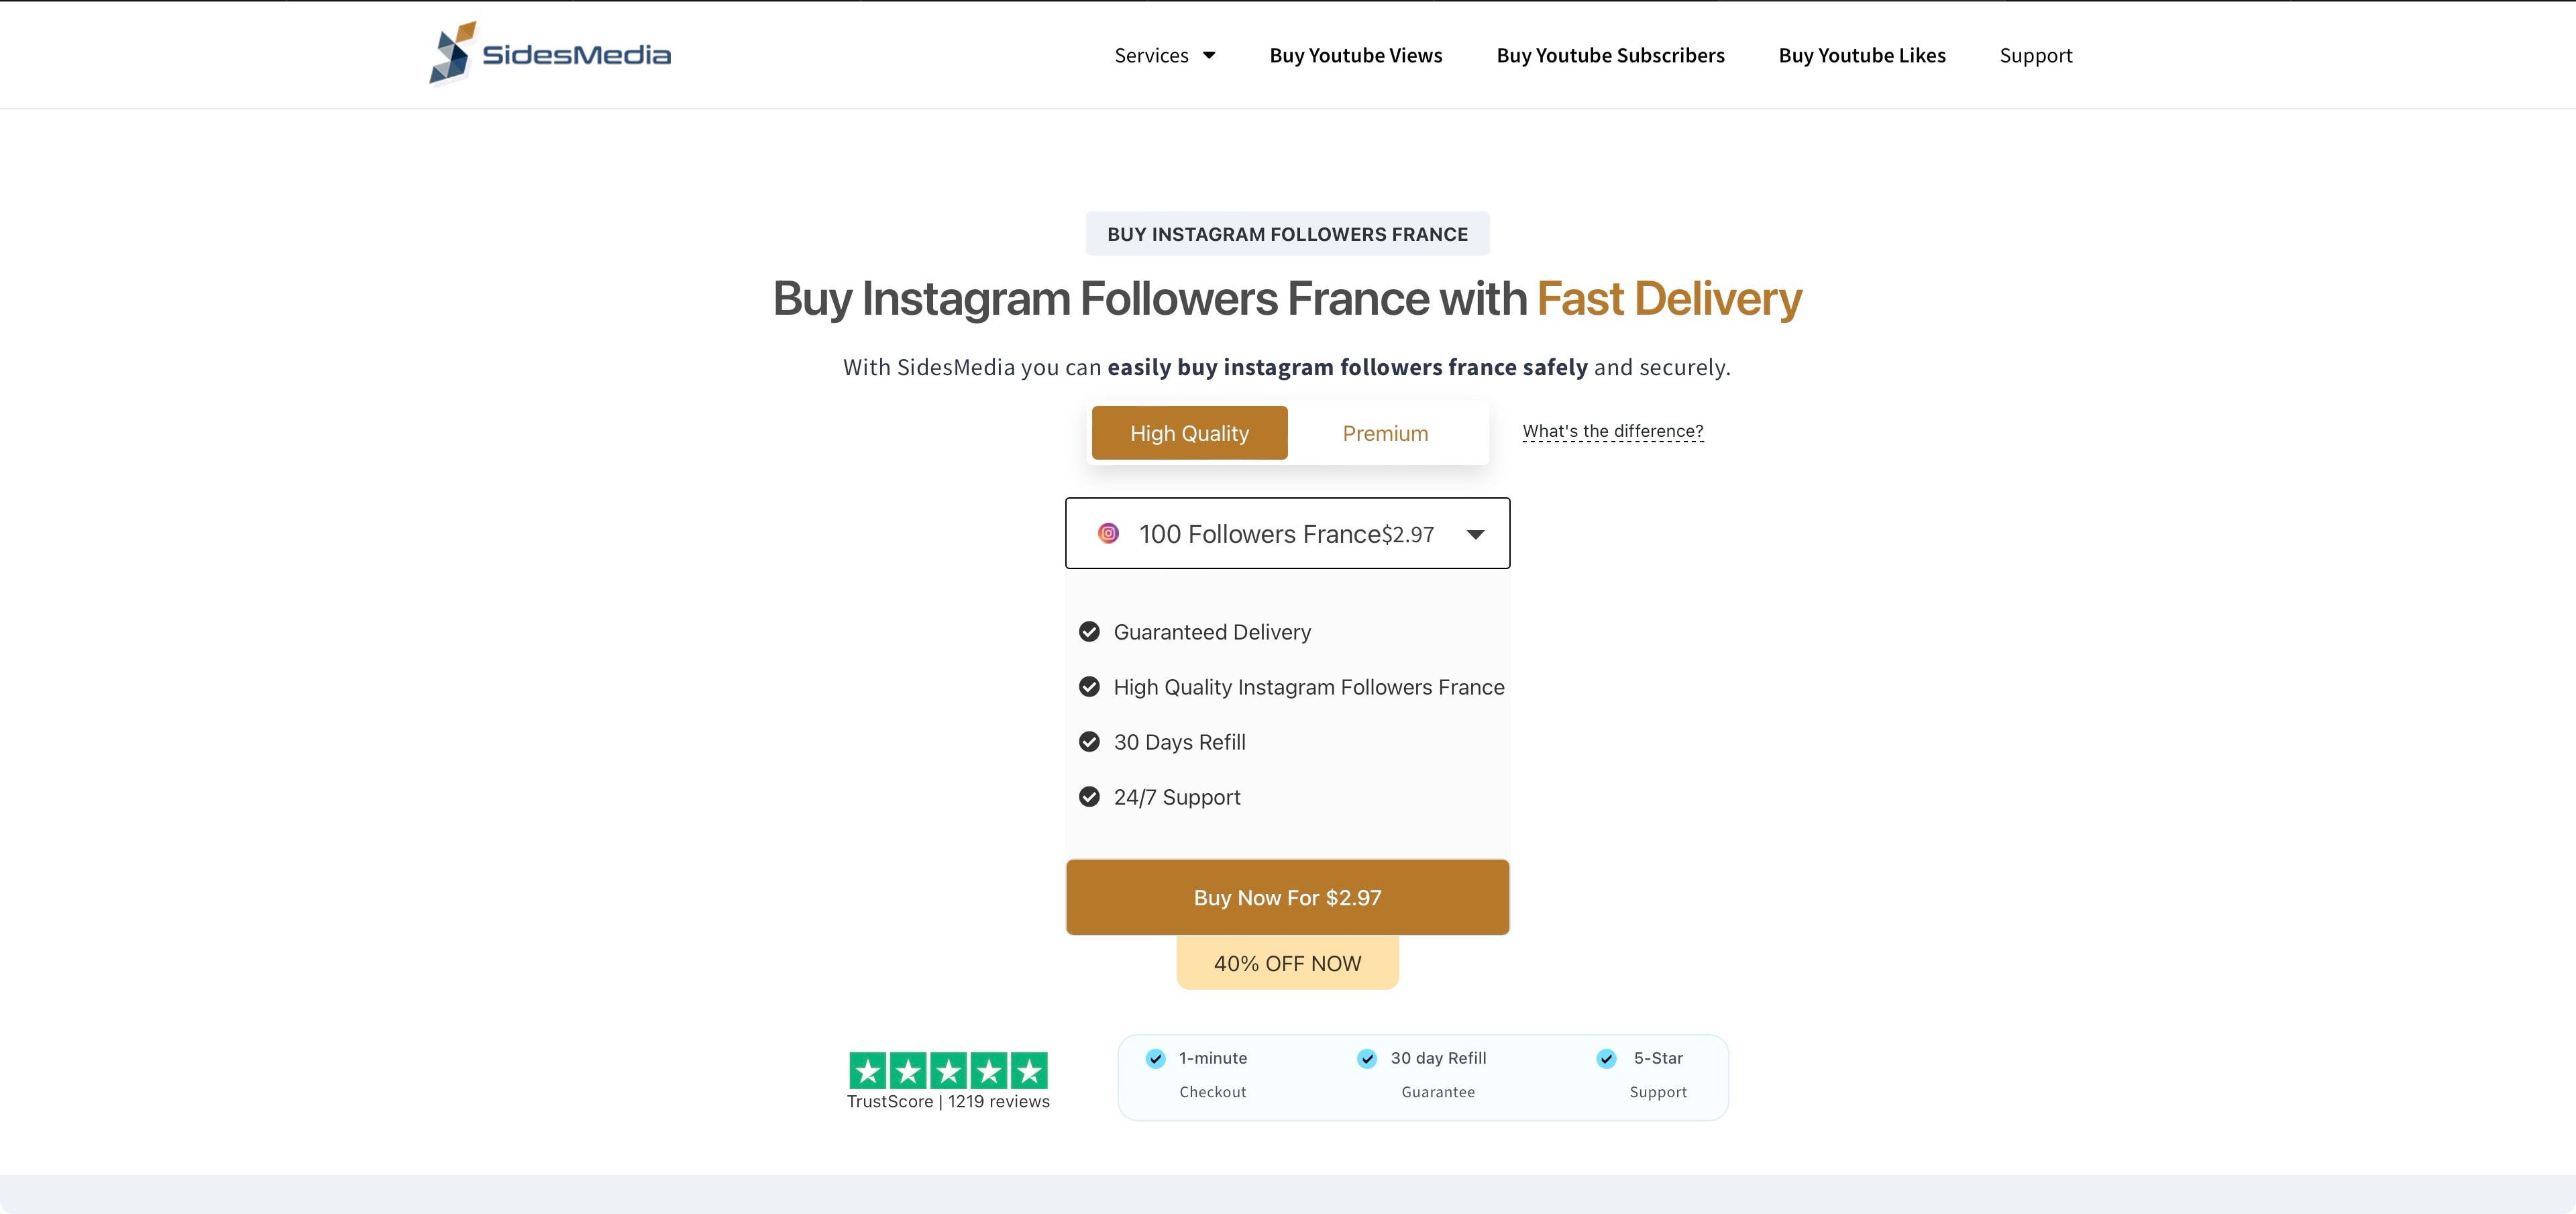 sidesmedia buy instagram followers france page